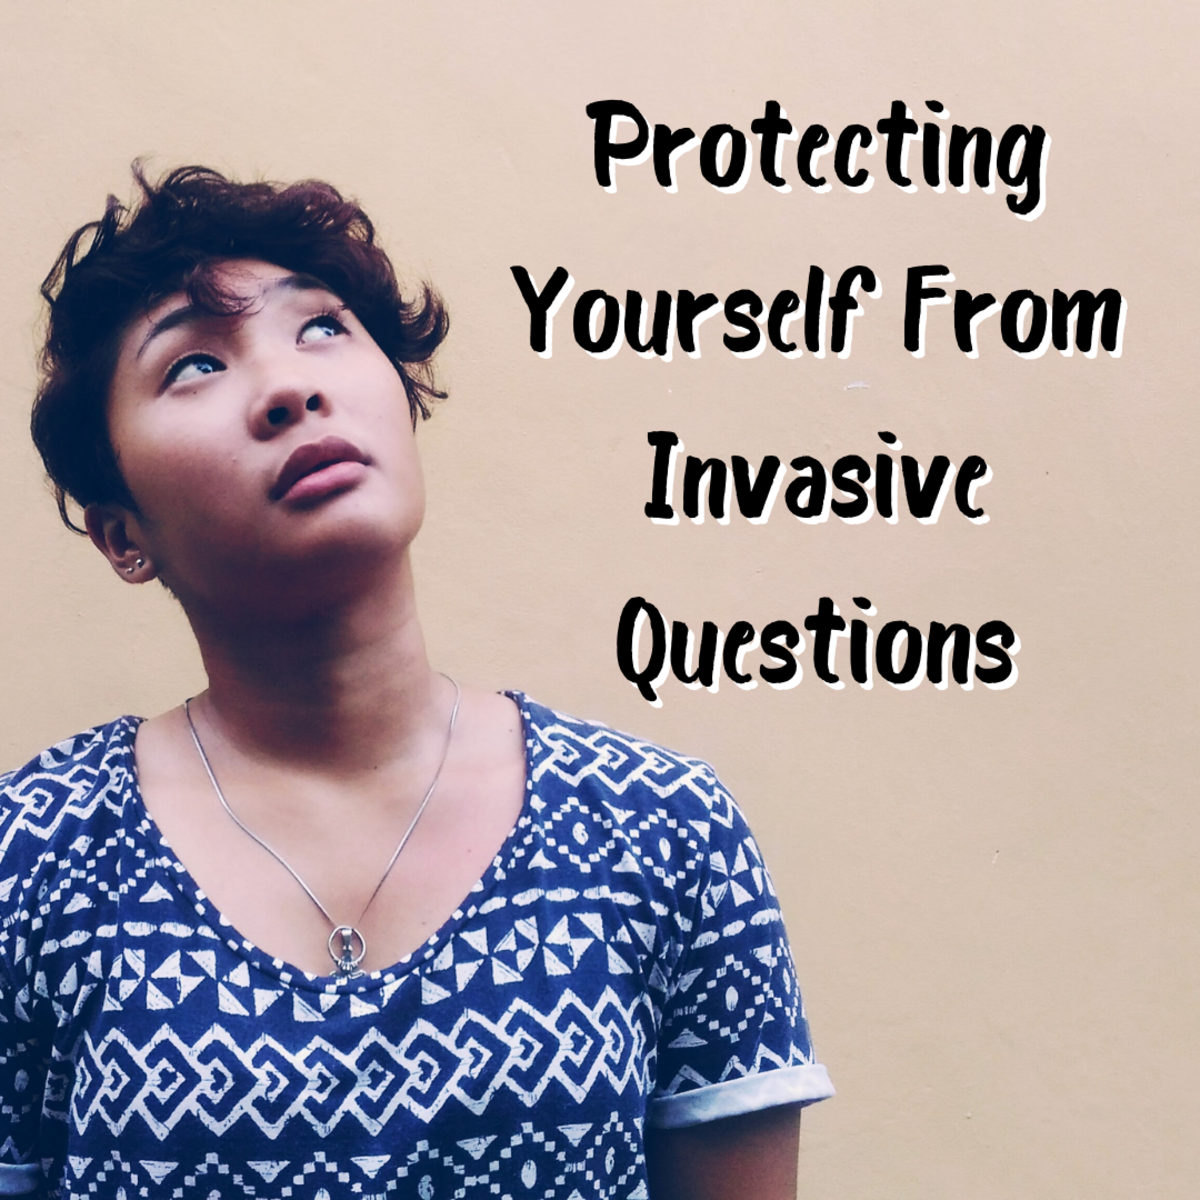 Protective Strategies Against Invasive Questioning